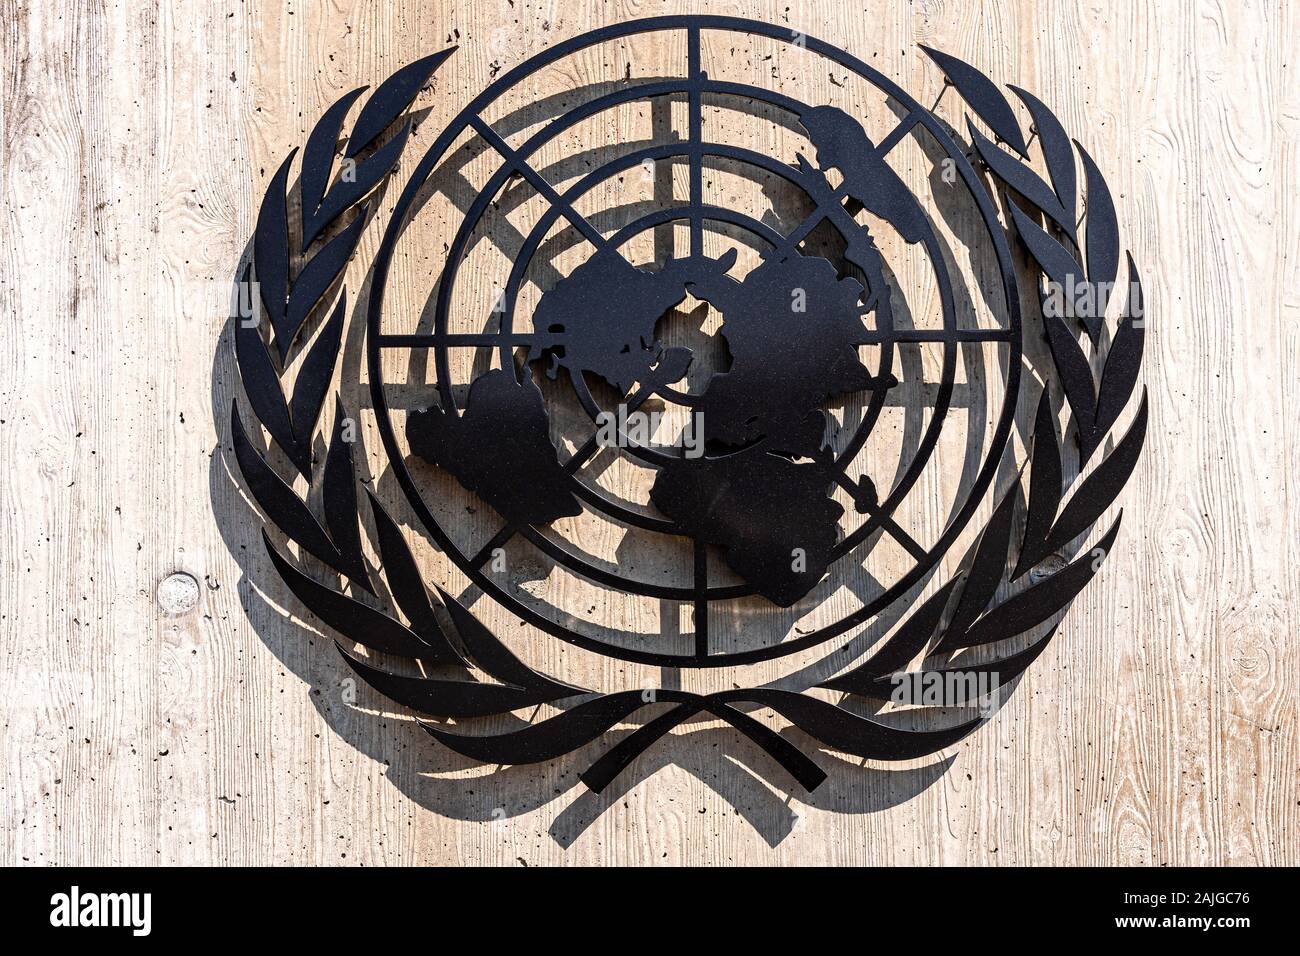 Geneva, Switzerland - April 15, 2019: United Nations sign located outside  the United Nations Office in Geneva - image Stock Photo - Alamy